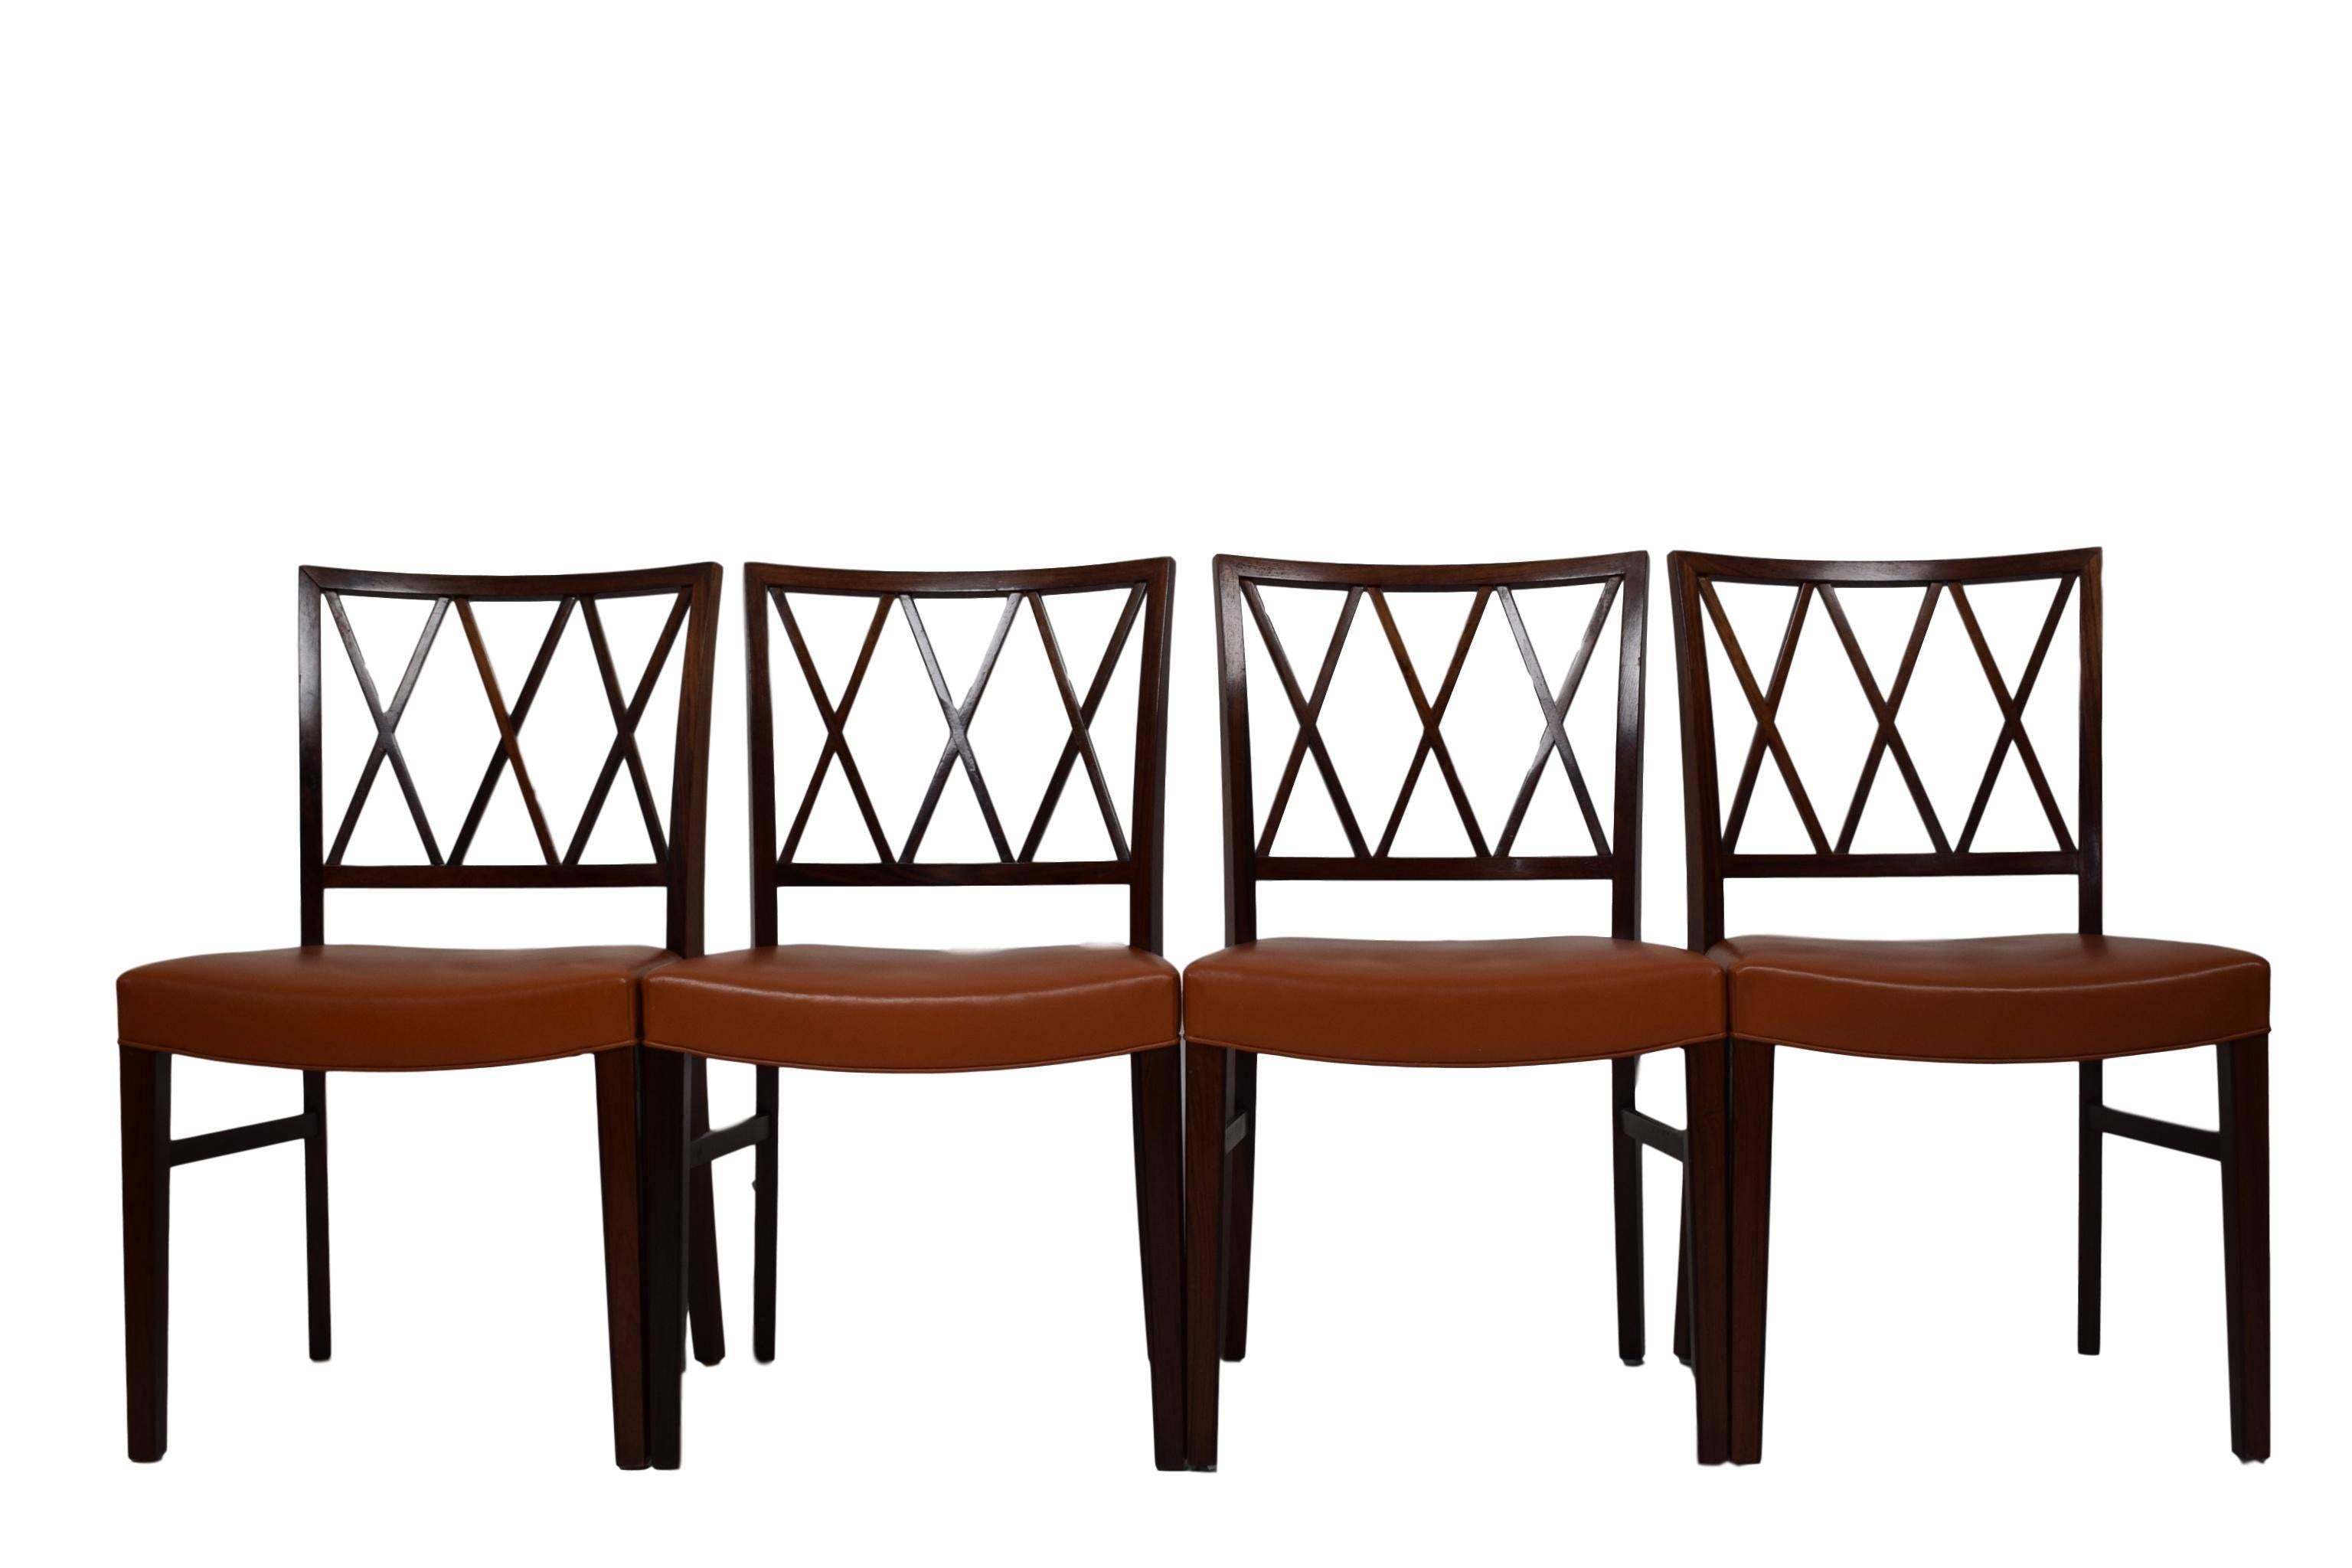 A set of four Danish midcentury rosewood dining chairs by Ole Wanscher (1903-1985). Produced by Slagelse Møbelværk. Upholstered with cognac brown leather.
 